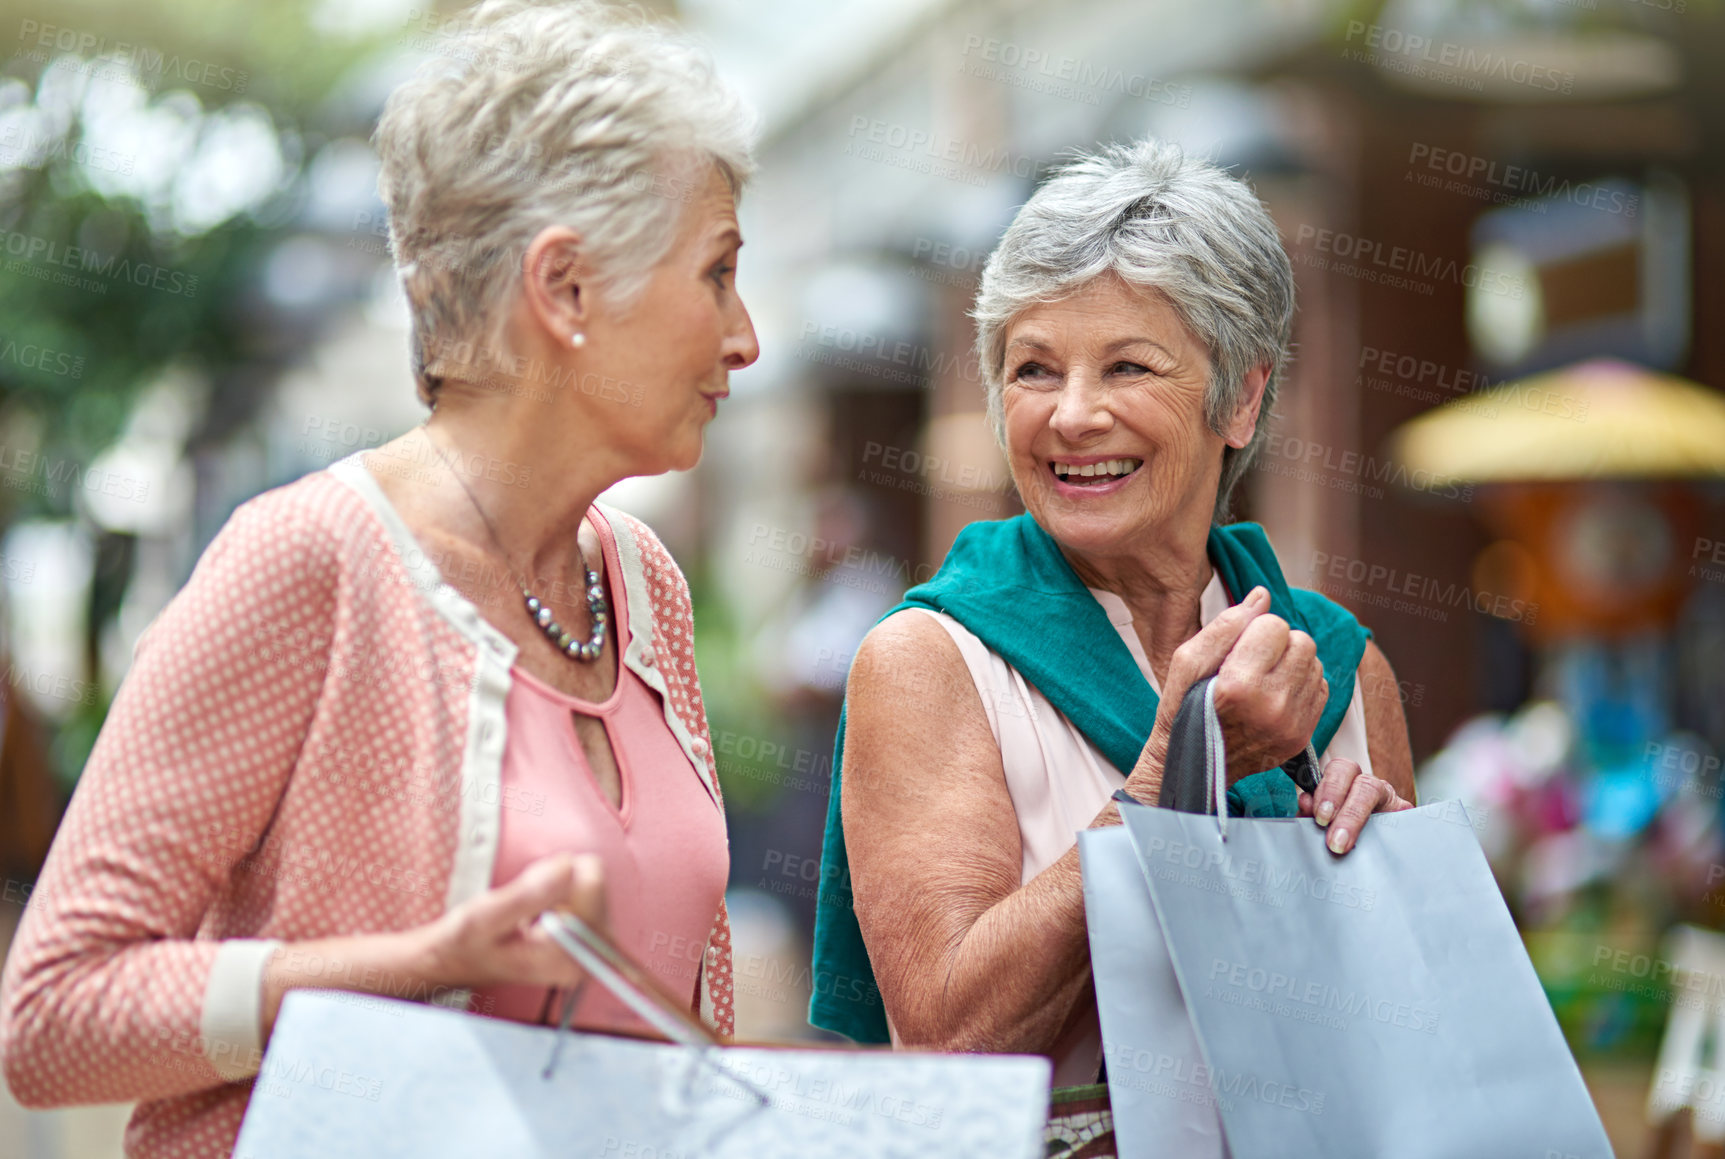 Buy stock photo Cropped shot of a two senior women out on a shopping spree